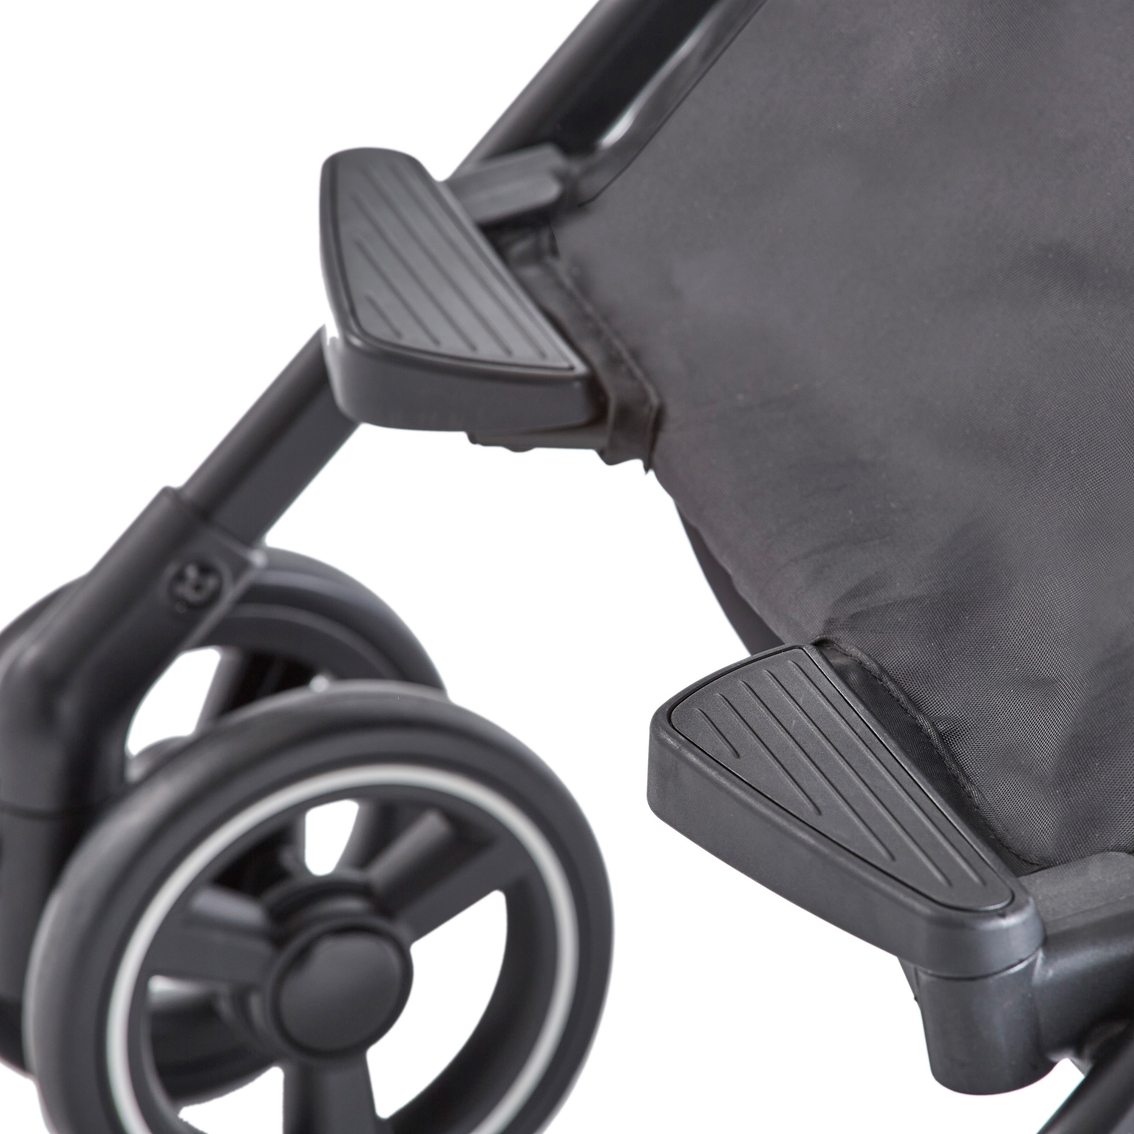 Contours Itsy Stroller - Image 4 of 5